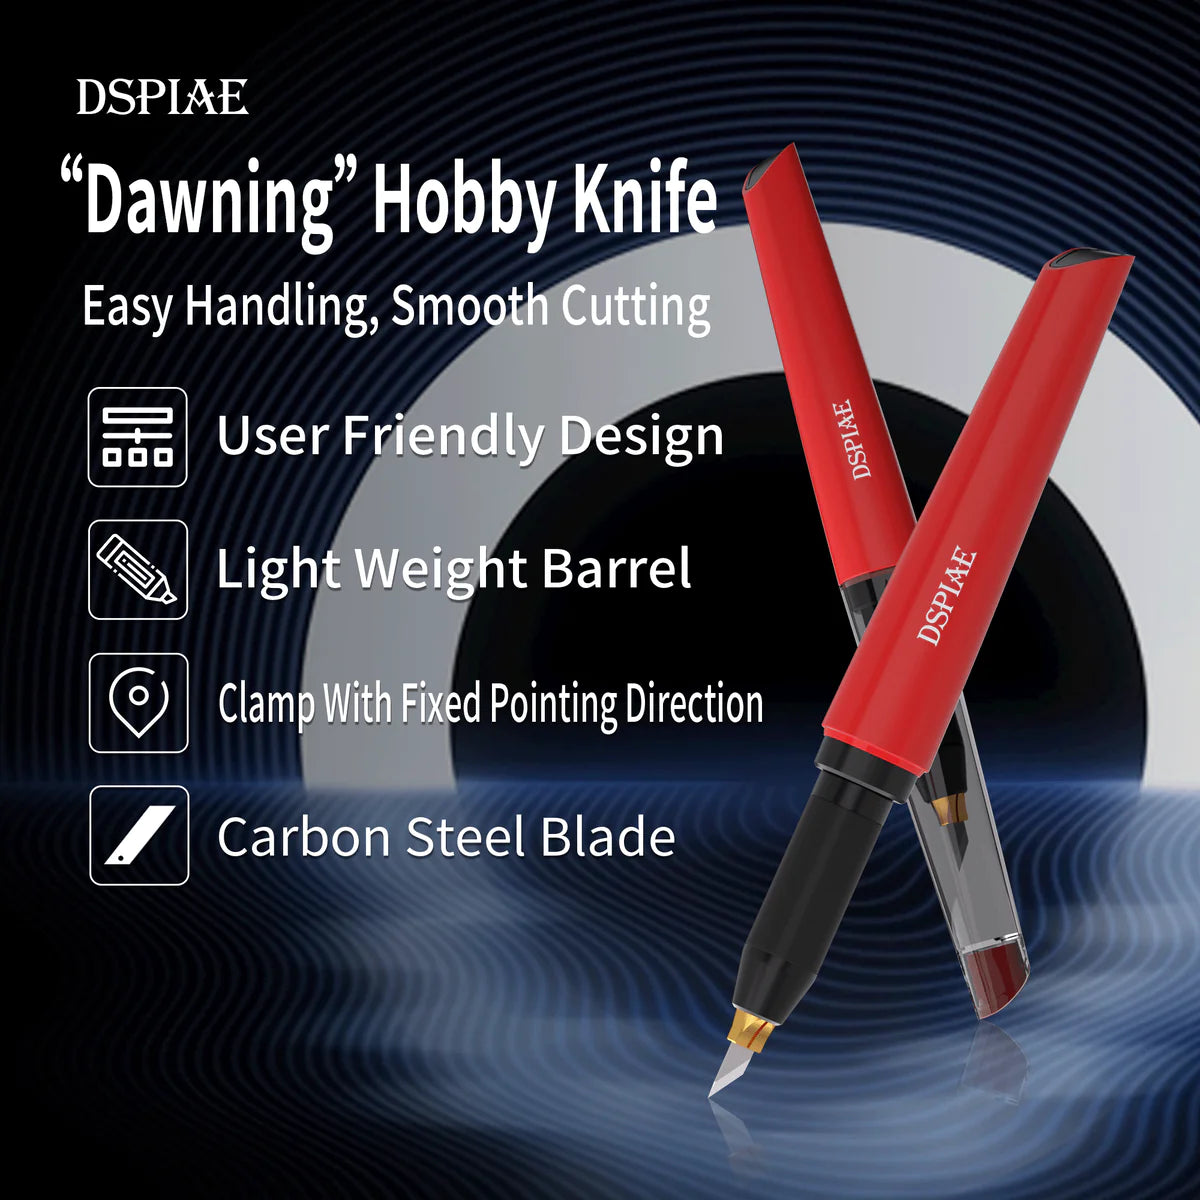 DSPIAE: "Drawing" Hobby Knife